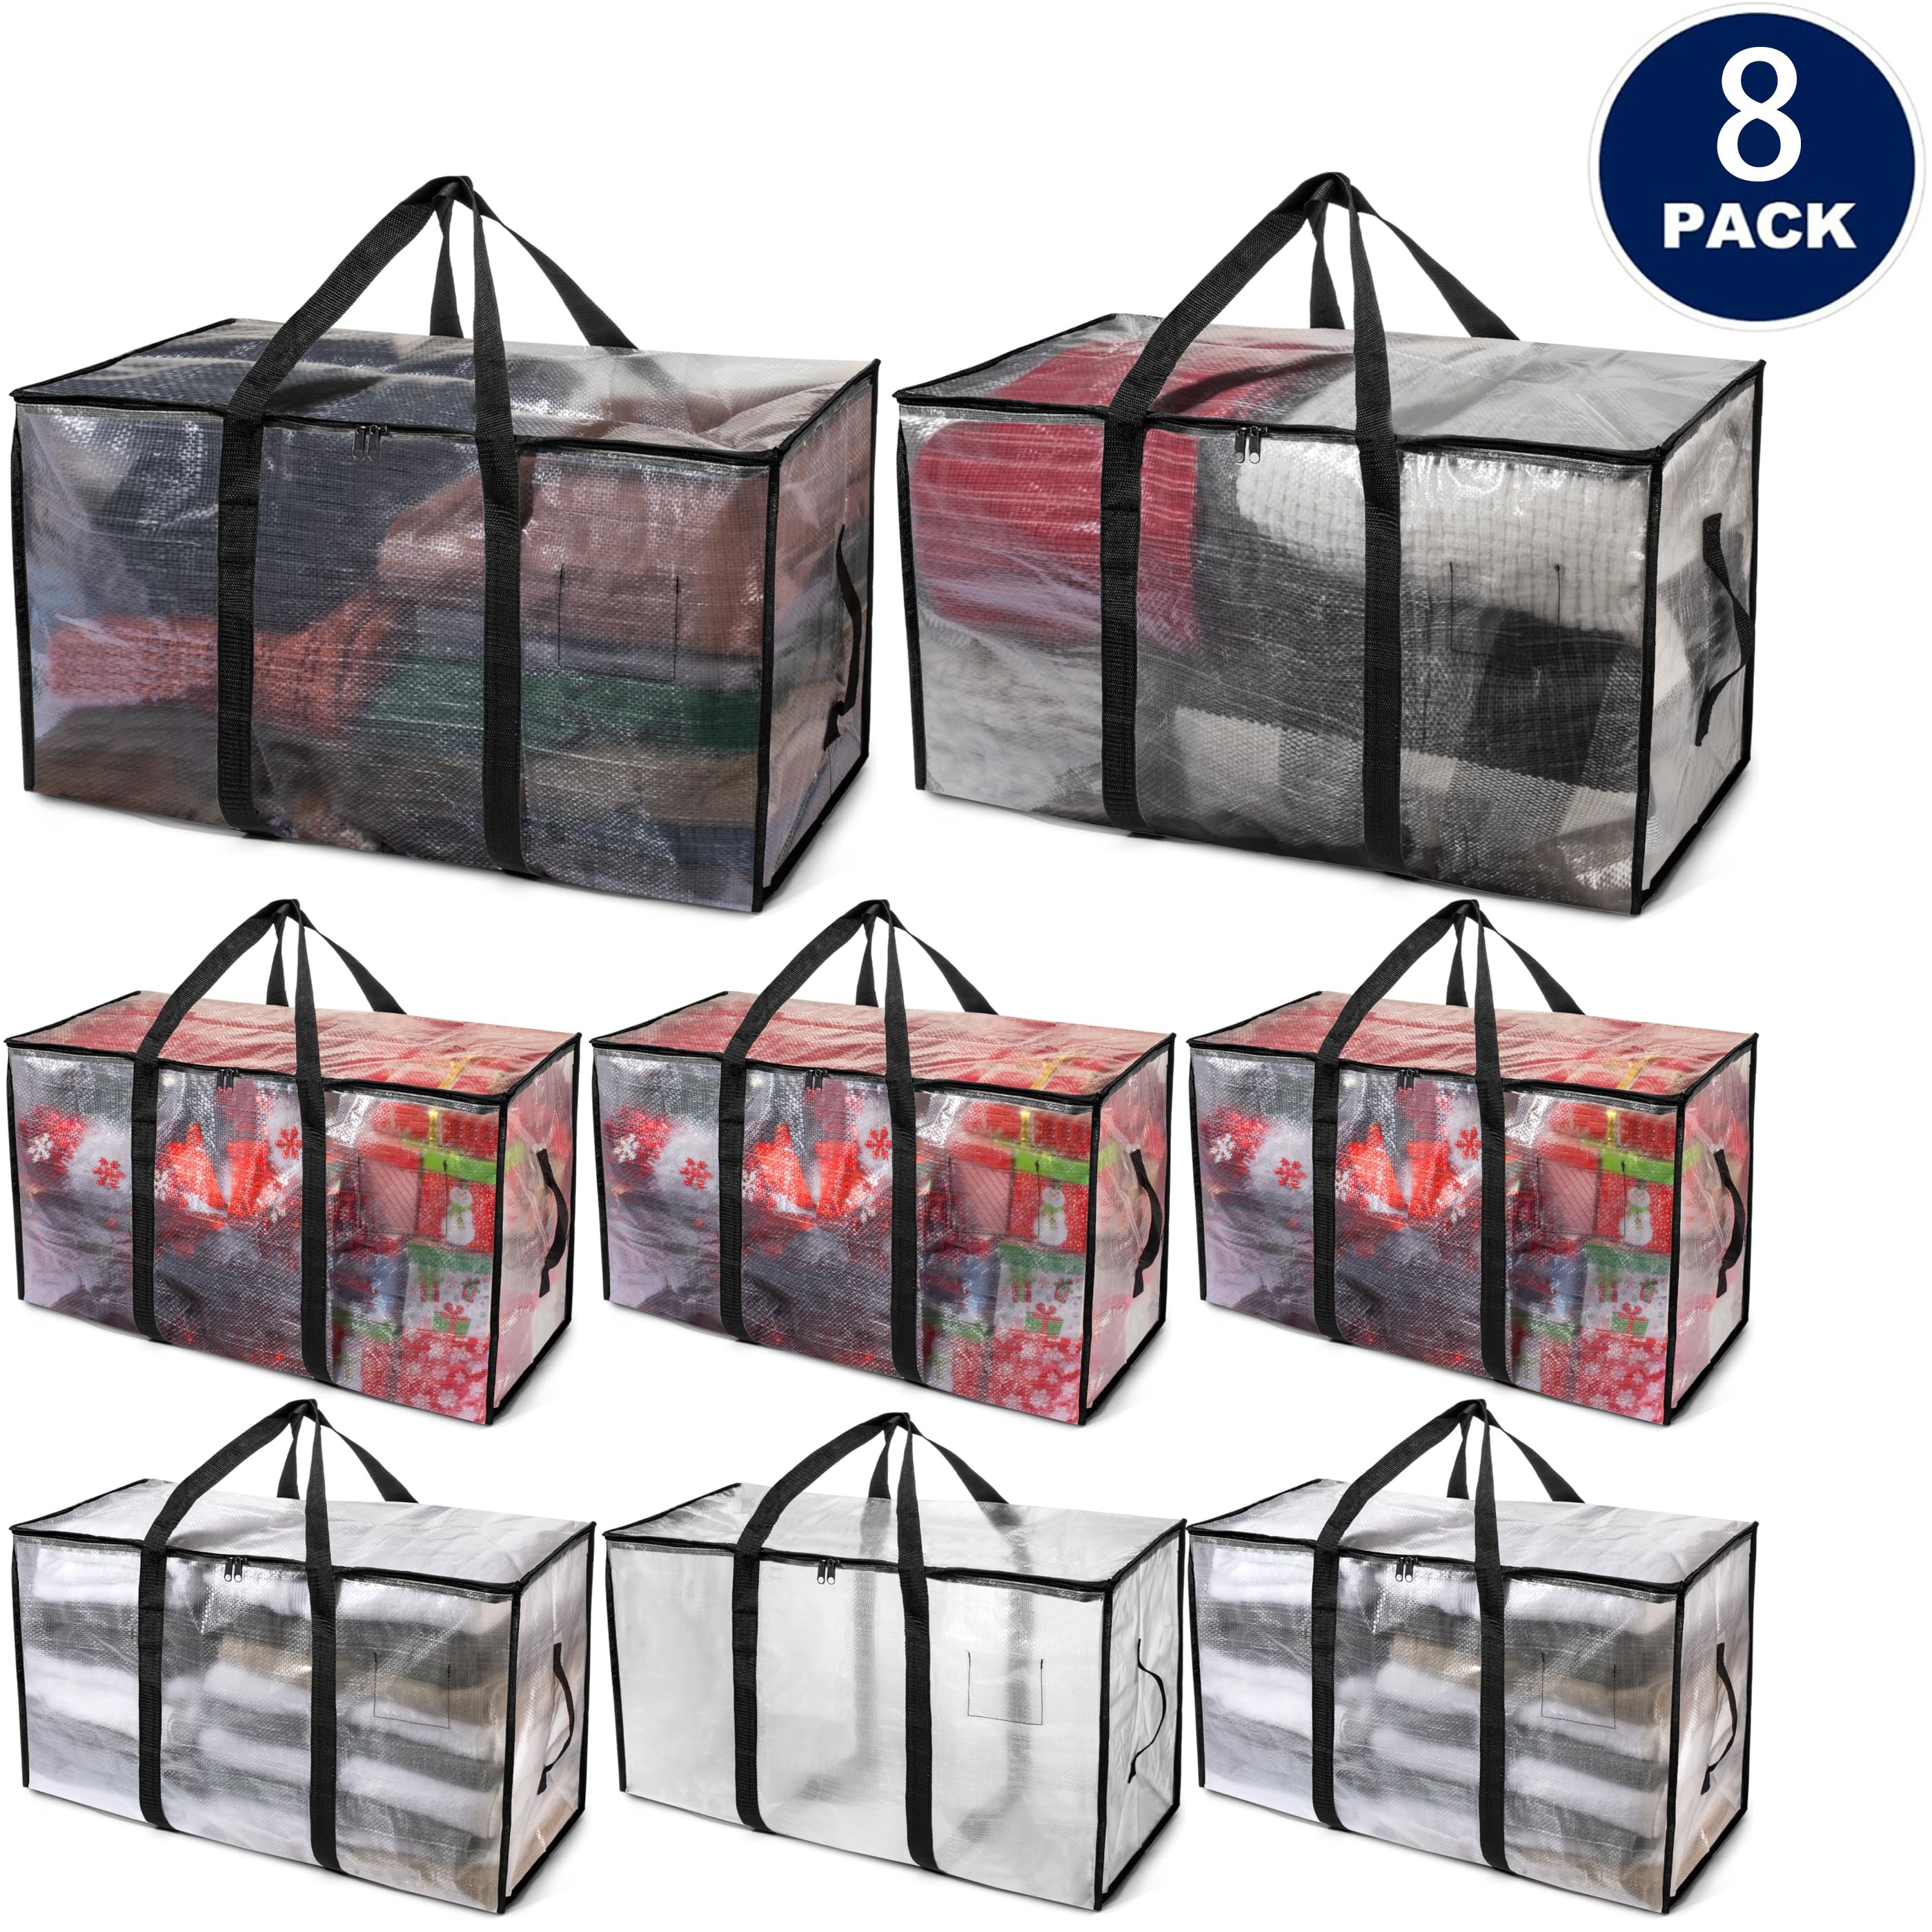 

8pcs Large Storage Bags With Zippers & Handles, Transparent Heavy-duty Portable Storage Bag Tote For Moving, College Dorms, Home, Ideal Storage Essentials